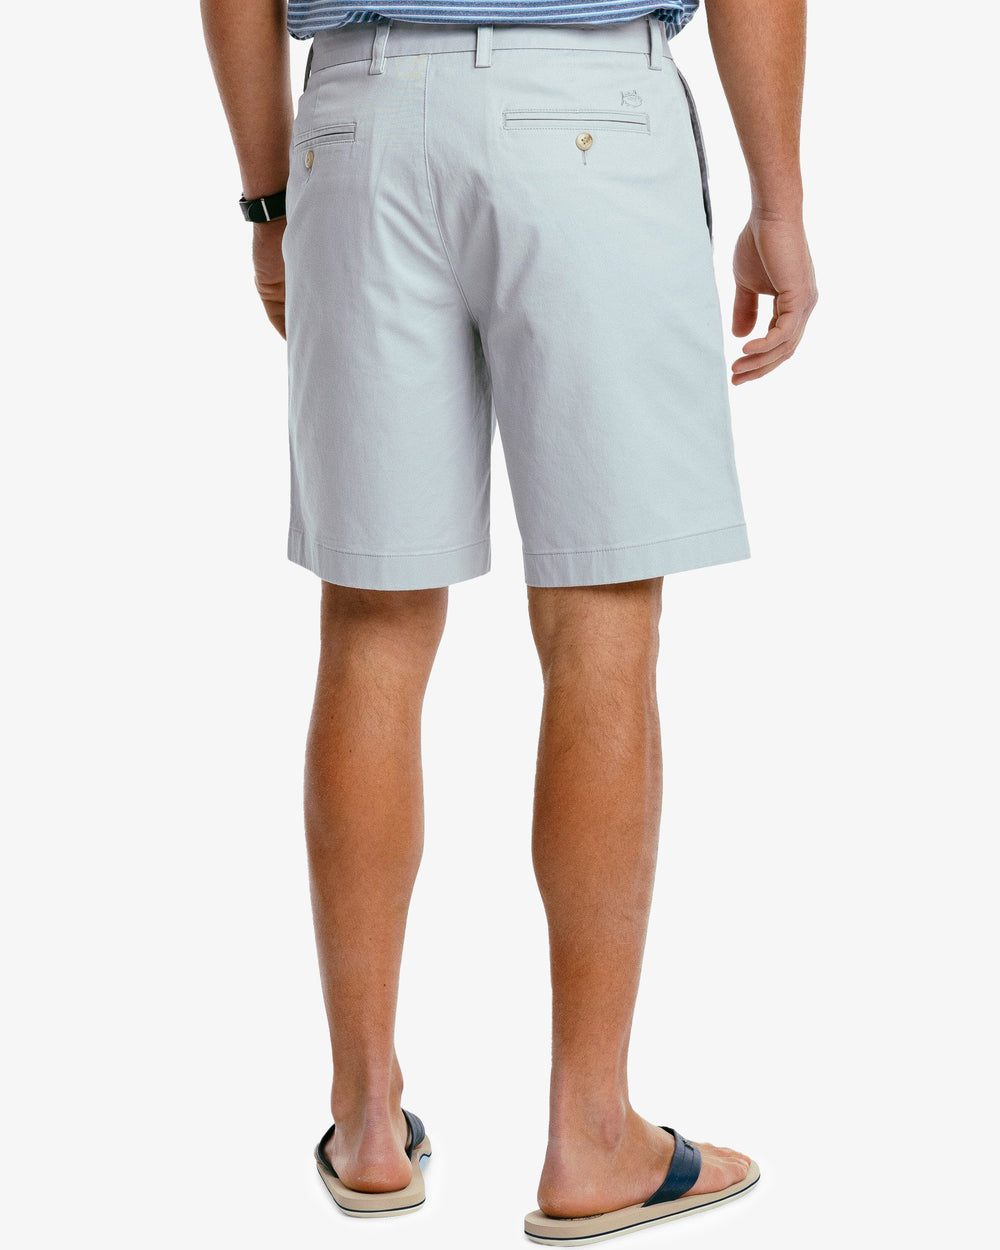 The back view of the Men's New Channel Marker 9 Inch Short by Southern Tide - Seagull Grey